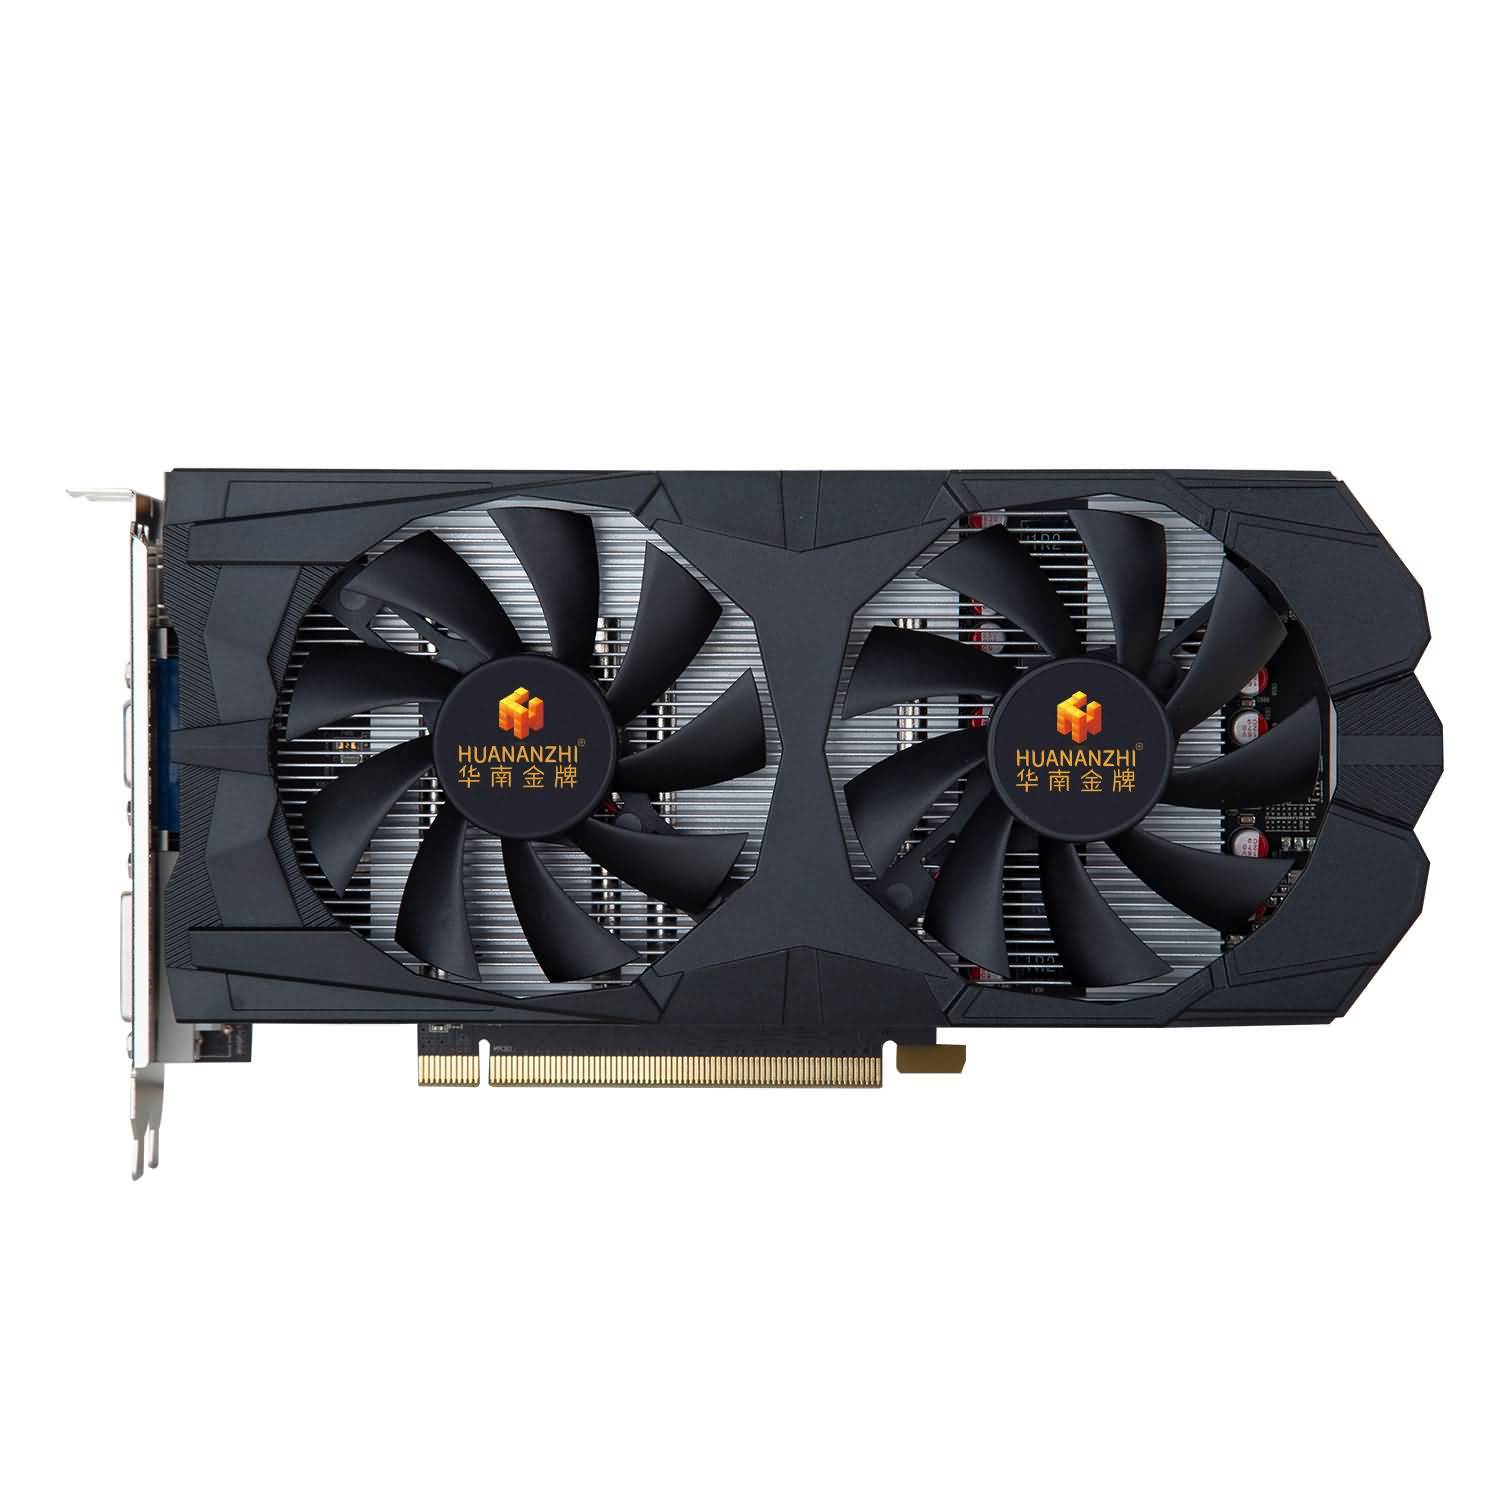 Download Huananzhi R9 370 4G Graphics Card Free